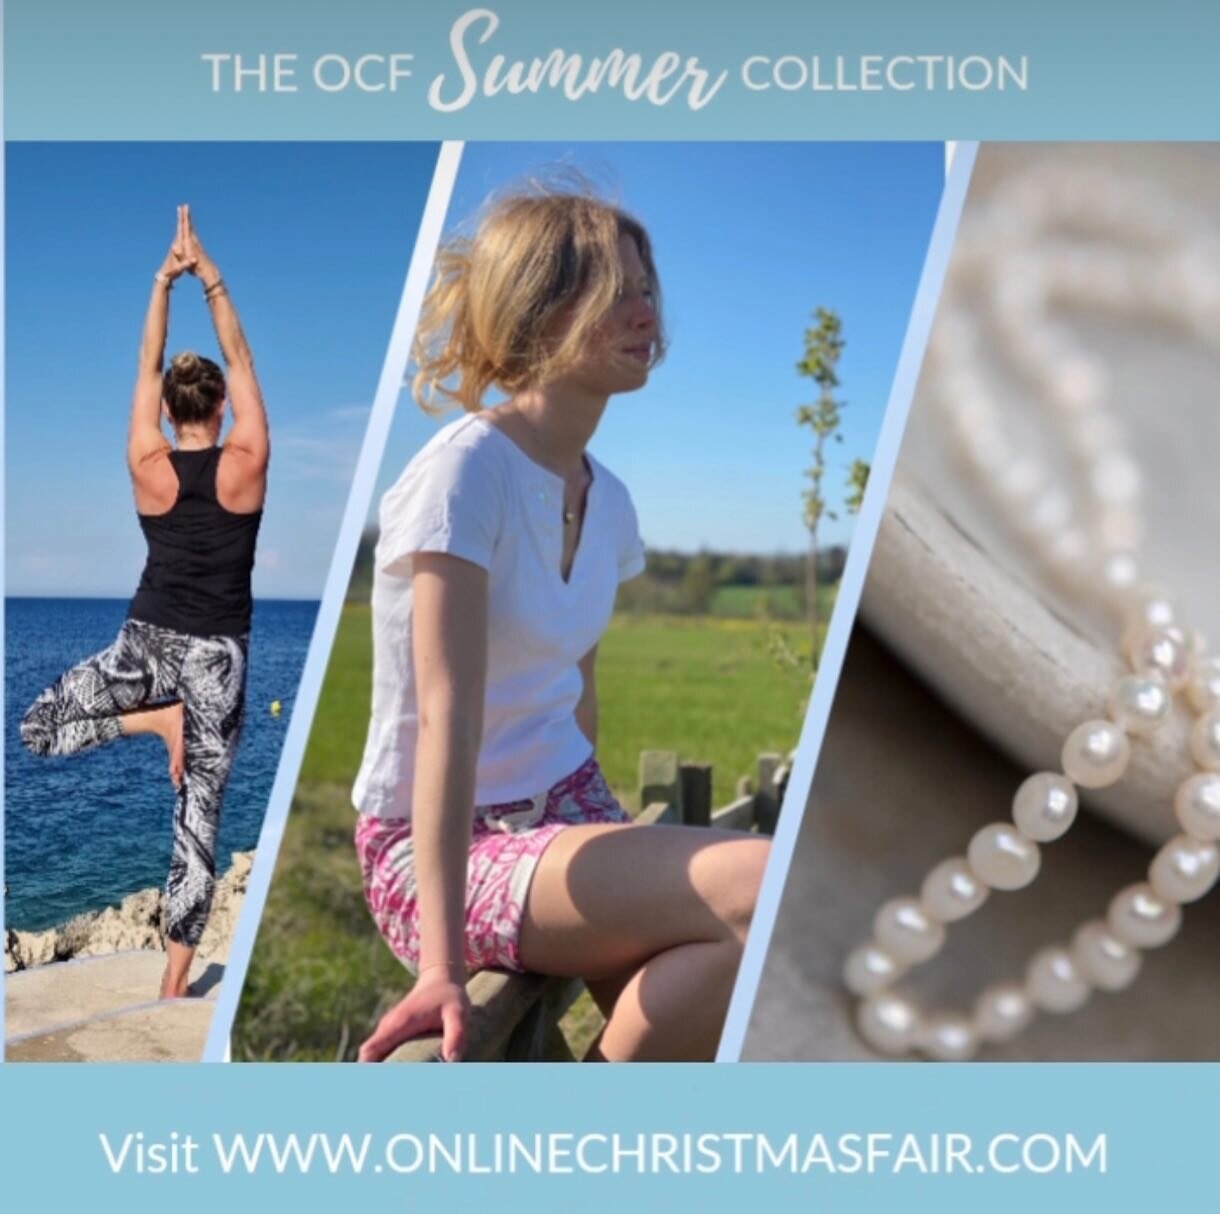 Looking for holiday clothes? Or gifts for friends? Teacher presents? Food or drink treats for home? Well this week there&rsquo;s up to 20% off a fab collection of small brands ready to tempt you. Quote OCFSummer to buy @onlinechristmasfair 

Nulu is 